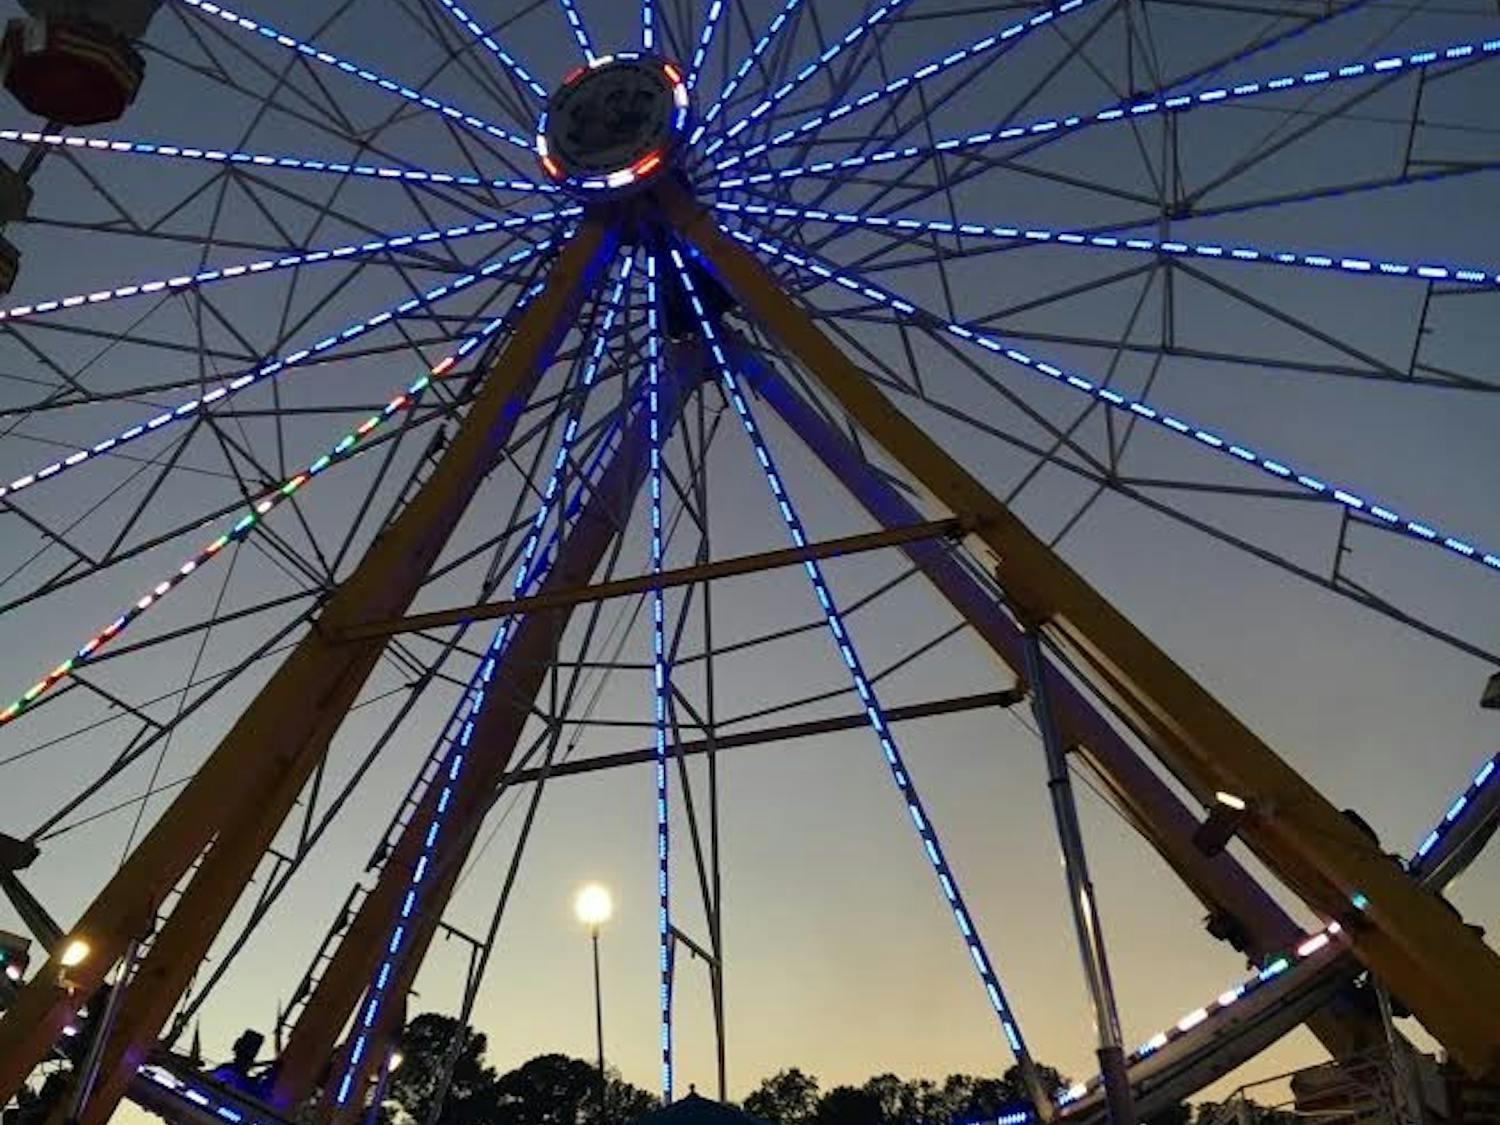 The ferris wheel is one of many attractions at the NC State Fair.